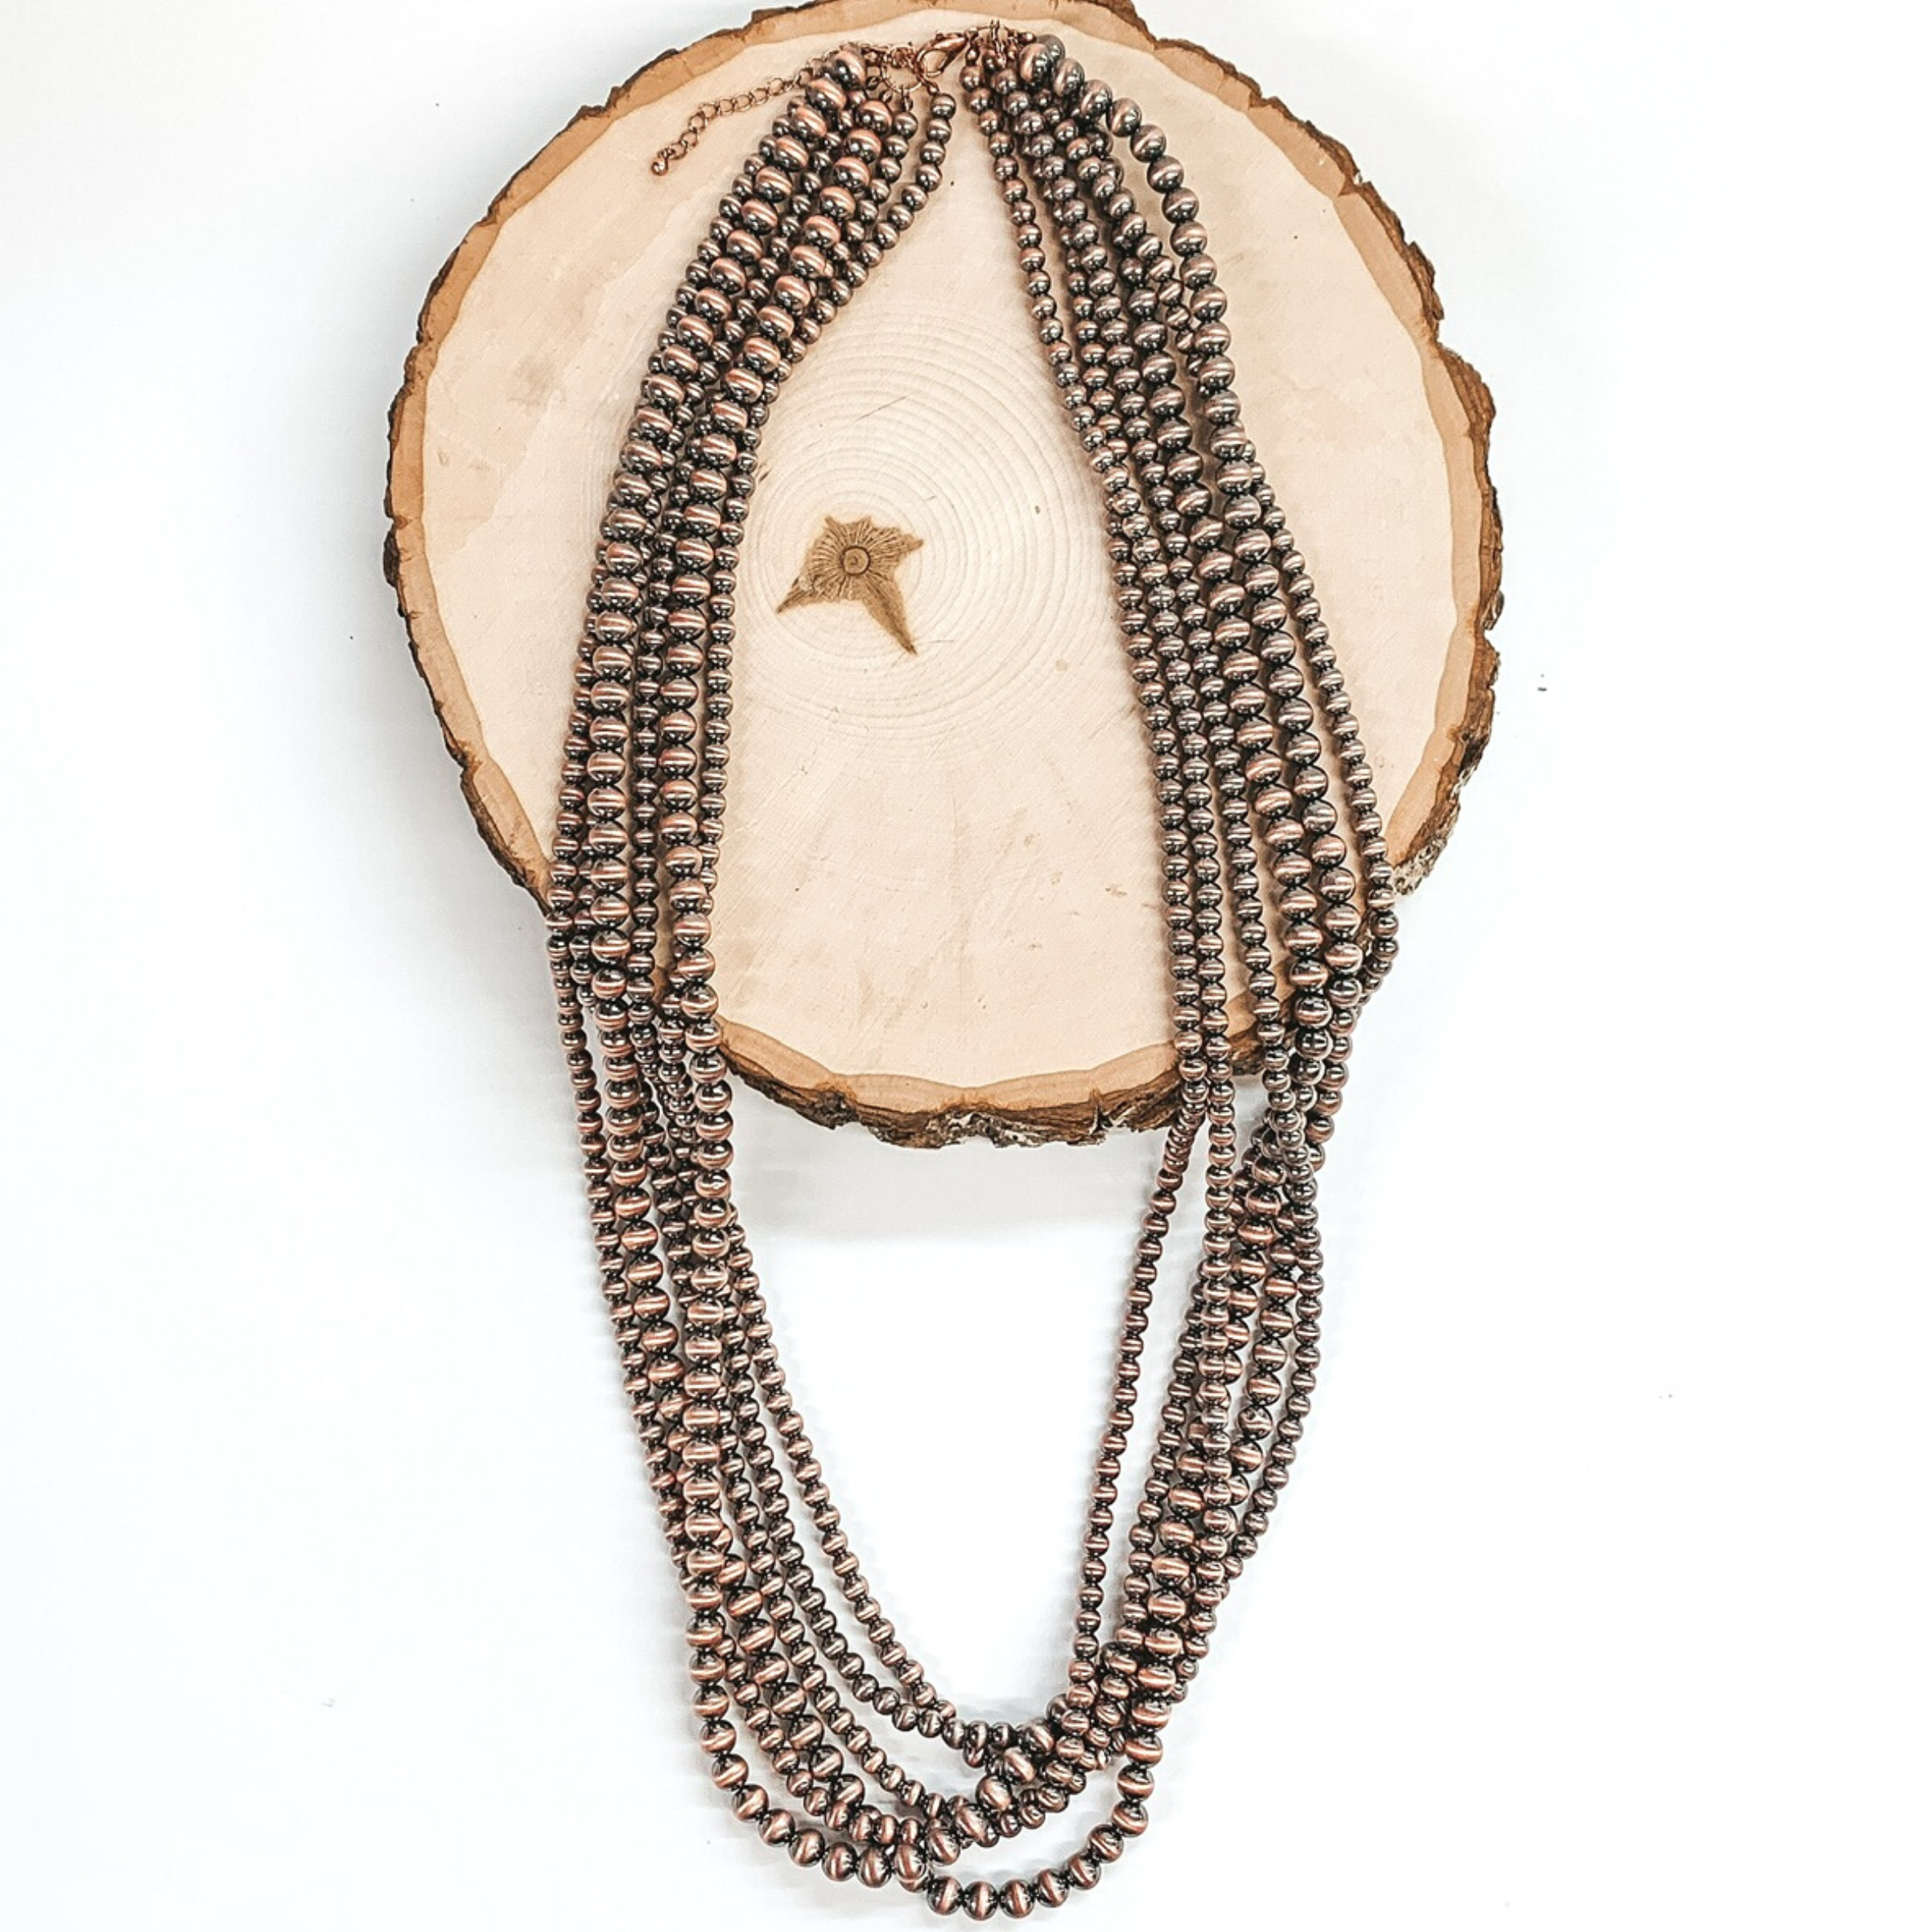 Multi stranded copper beaded, adjustable necklace. This necklace is half laying on a piece of wood on a white background.